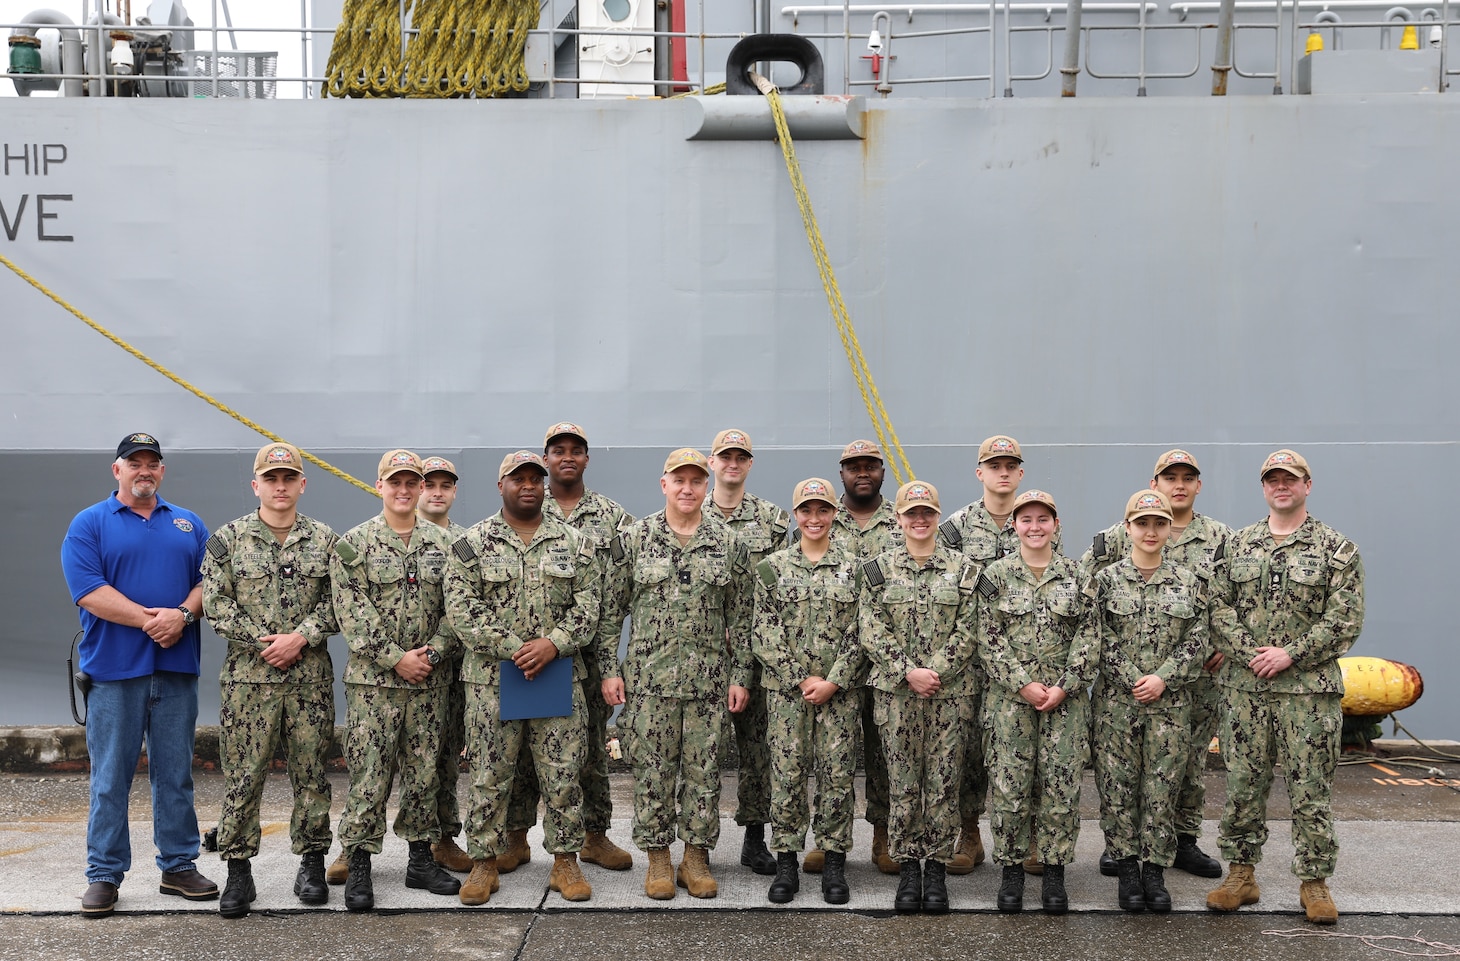 YOKOHAMA, Japan (July 13, 2022) Rear Adm. Rick Seif, commander, Submarine Group 7/Task Force 74, center, and Mr. Robert Swinburne, ship’s master, pose for a photo with Sailors from Naval Ocean Processing Facility, Whidbey Island, July 13, 2022. Submarine Group 7 directs forward-deployed, combat capable forces across the full spectrum of undersea warfare throughout the Western Pacific, Indian Ocean and Arabian Sea. (U.S. Navy photo by Lt. Cmdr. Rob Reinheimer)